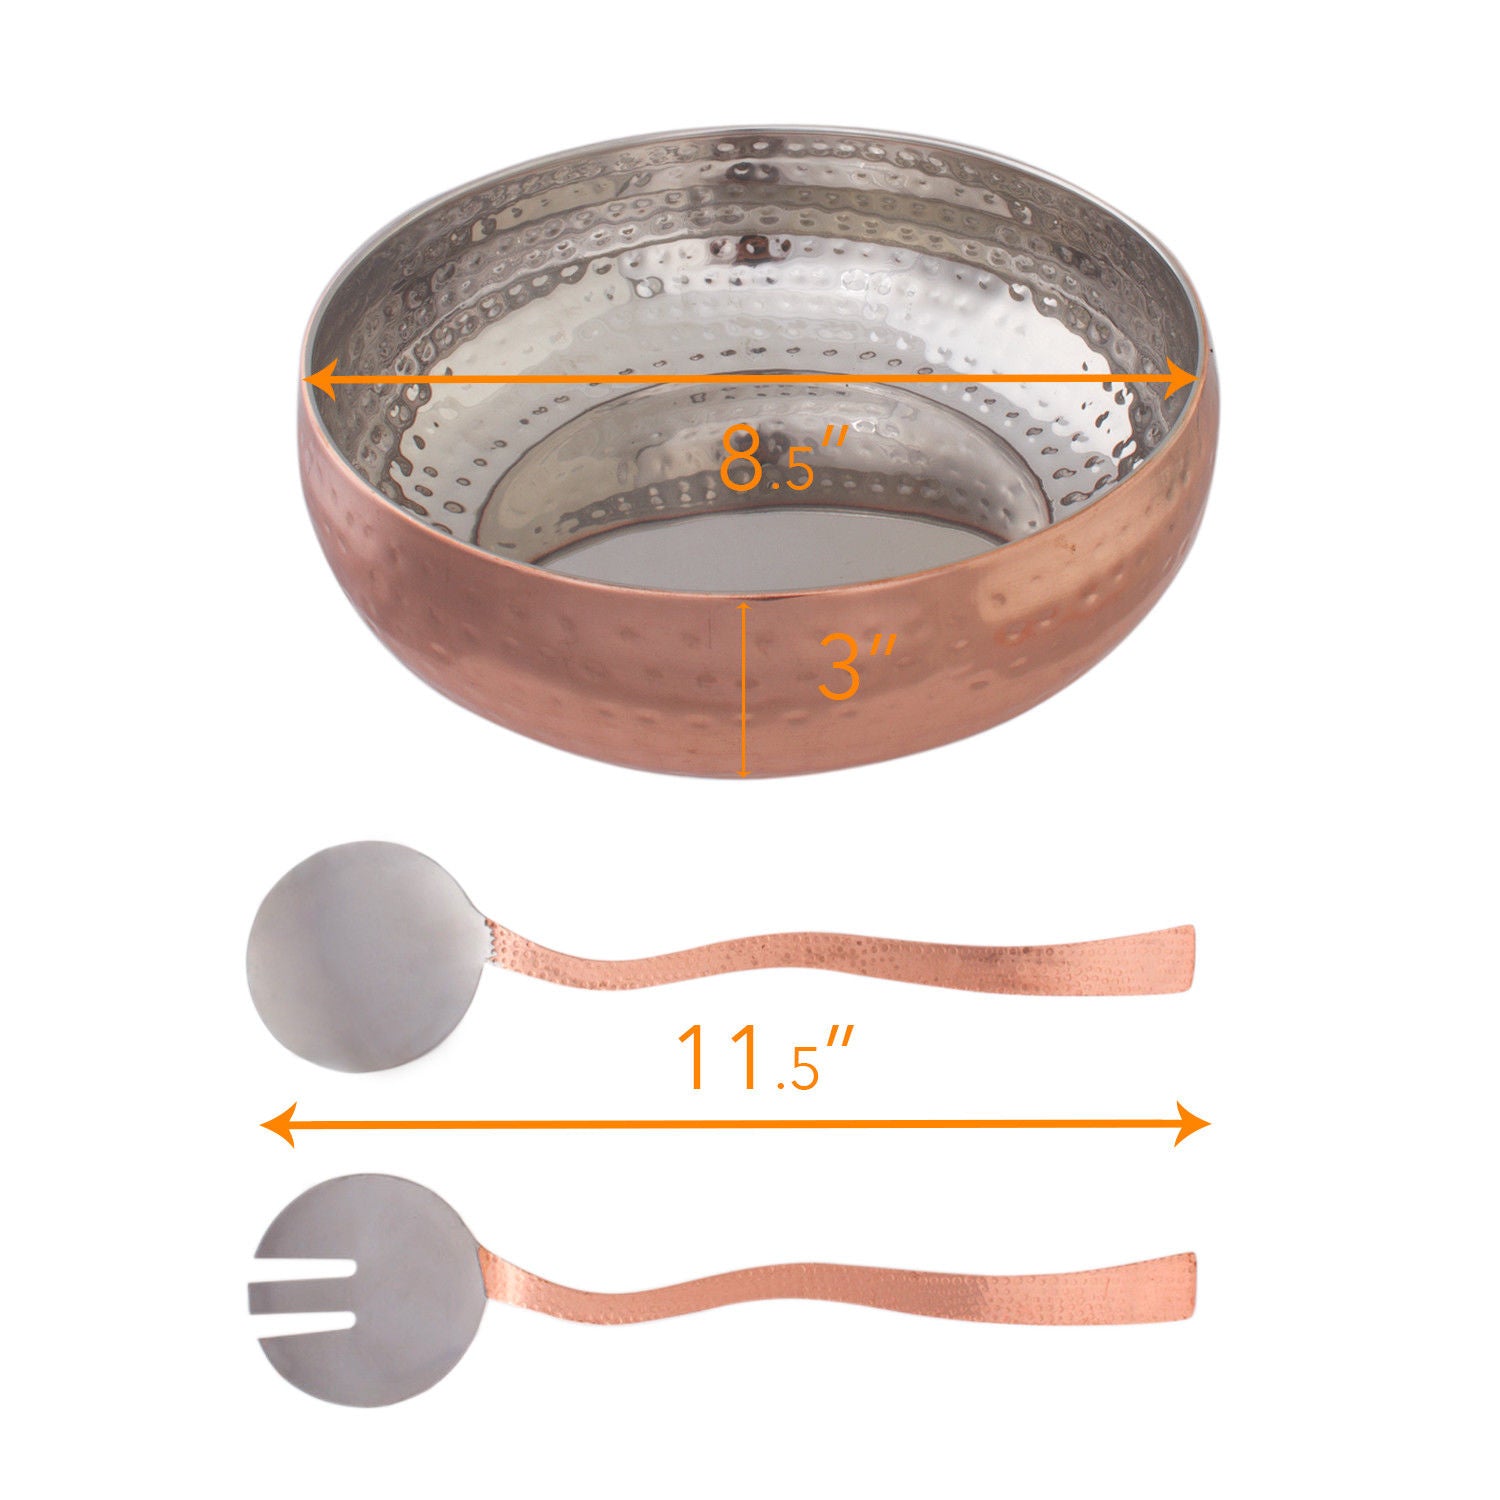 Copper Hammered Stainless Steel Salad Bowl With Serving Spoon Set